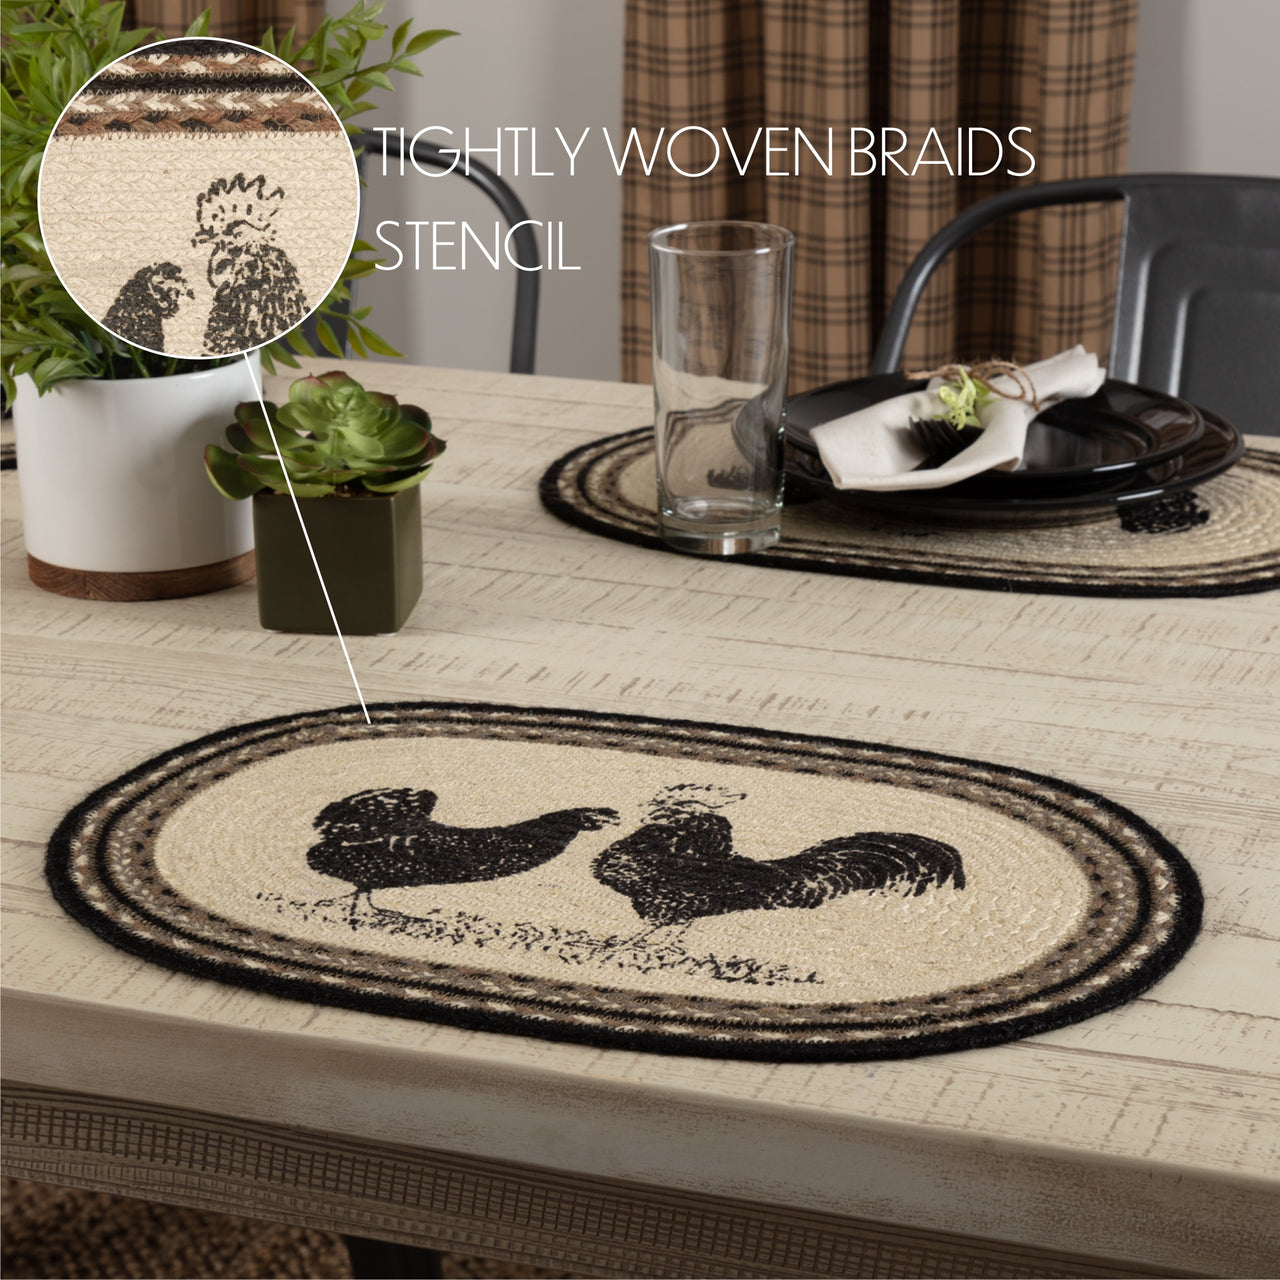 Sawyer Mill Charcoal Poultry Jute Braided Placemat Set of 6